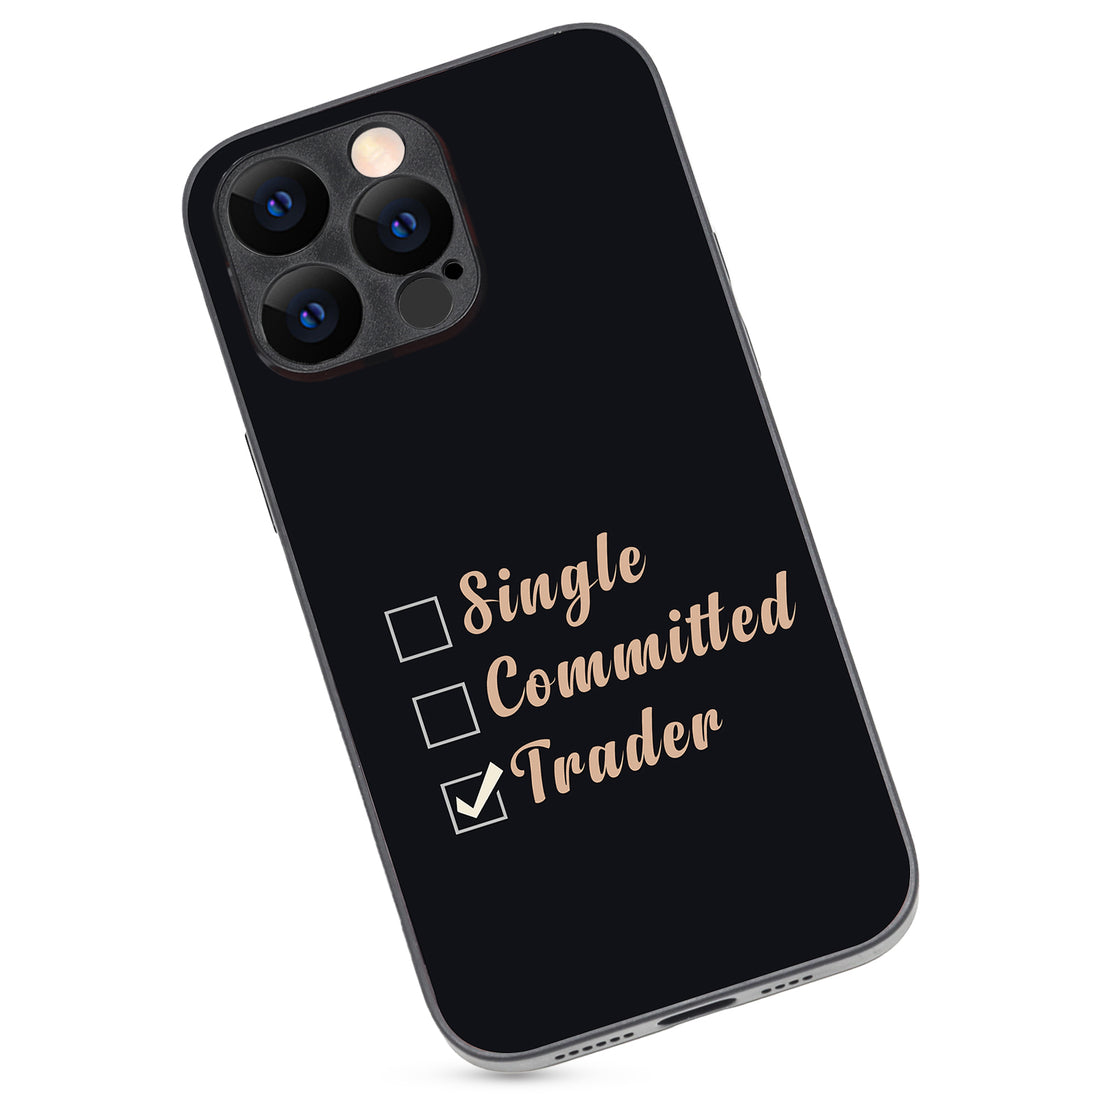 Single, Commited, Trader Trading iPhone 14 Pro Max Case